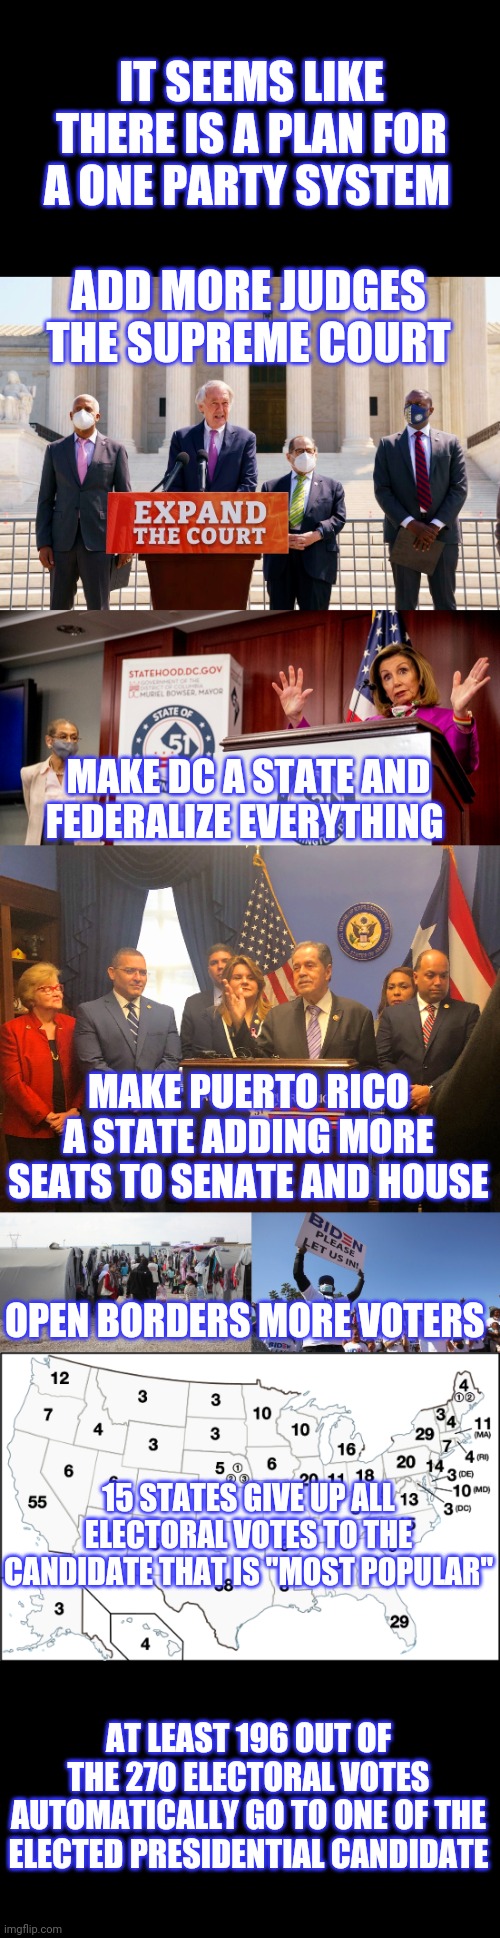 One party system | IT SEEMS LIKE THERE IS A PLAN FOR A ONE PARTY SYSTEM; ADD MORE JUDGES THE SUPREME COURT; MAKE DC A STATE AND FEDERALIZE EVERYTHING; MAKE PUERTO RICO A STATE ADDING MORE SEATS TO SENATE AND HOUSE; OPEN BORDERS MORE VOTERS; 15 STATES GIVE UP ALL ELECTORAL VOTES TO THE CANDIDATE THAT IS "MOST POPULAR"; AT LEAST 196 OUT OF THE 270 ELECTORAL VOTES AUTOMATICALLY GO TO ONE OF THE ELECTED PRESIDENTIAL CANDIDATE | image tagged in democrats | made w/ Imgflip meme maker